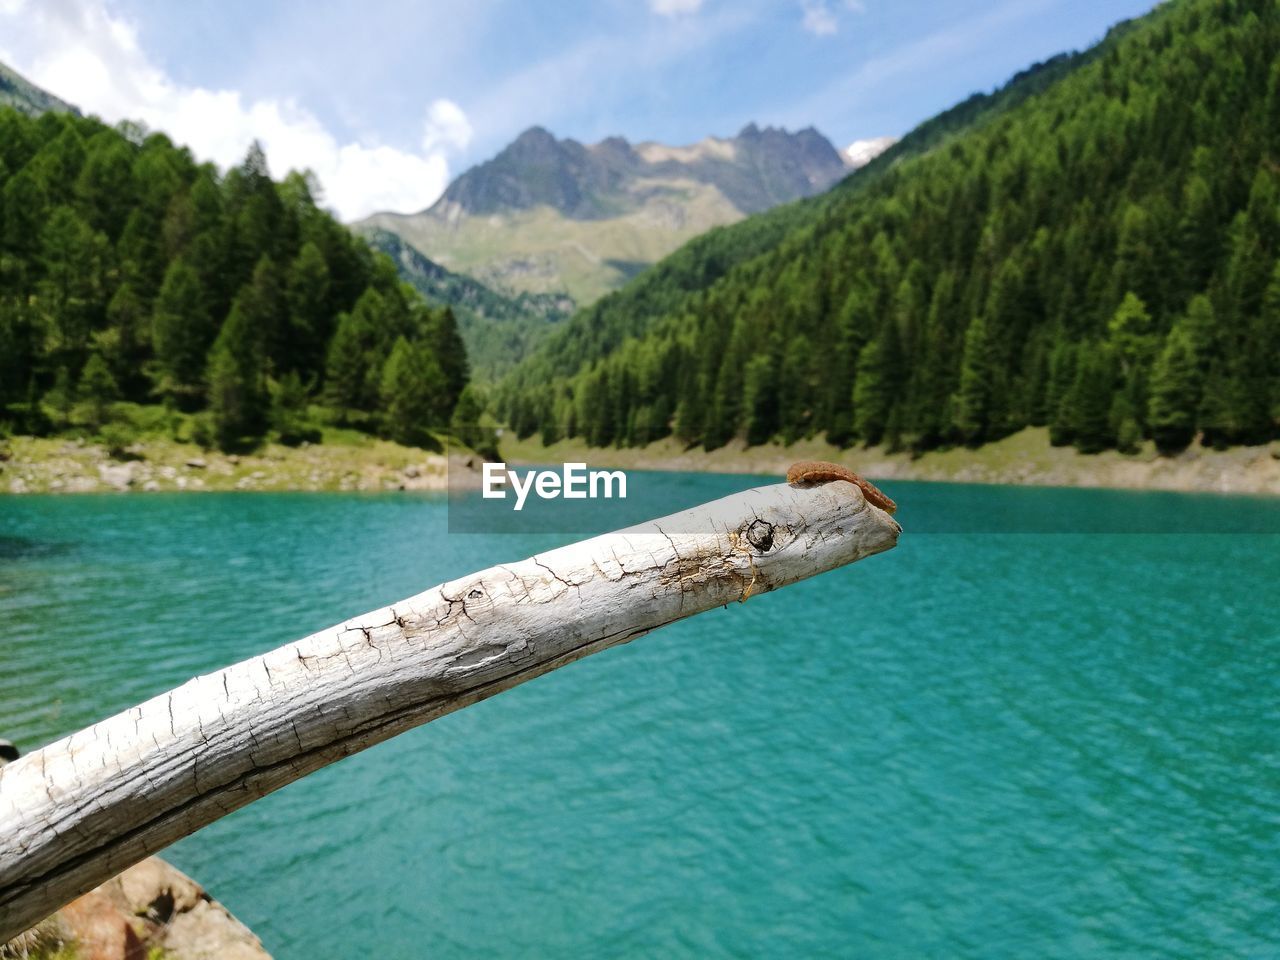 Insect on wood against turquoise lake with mountains in background